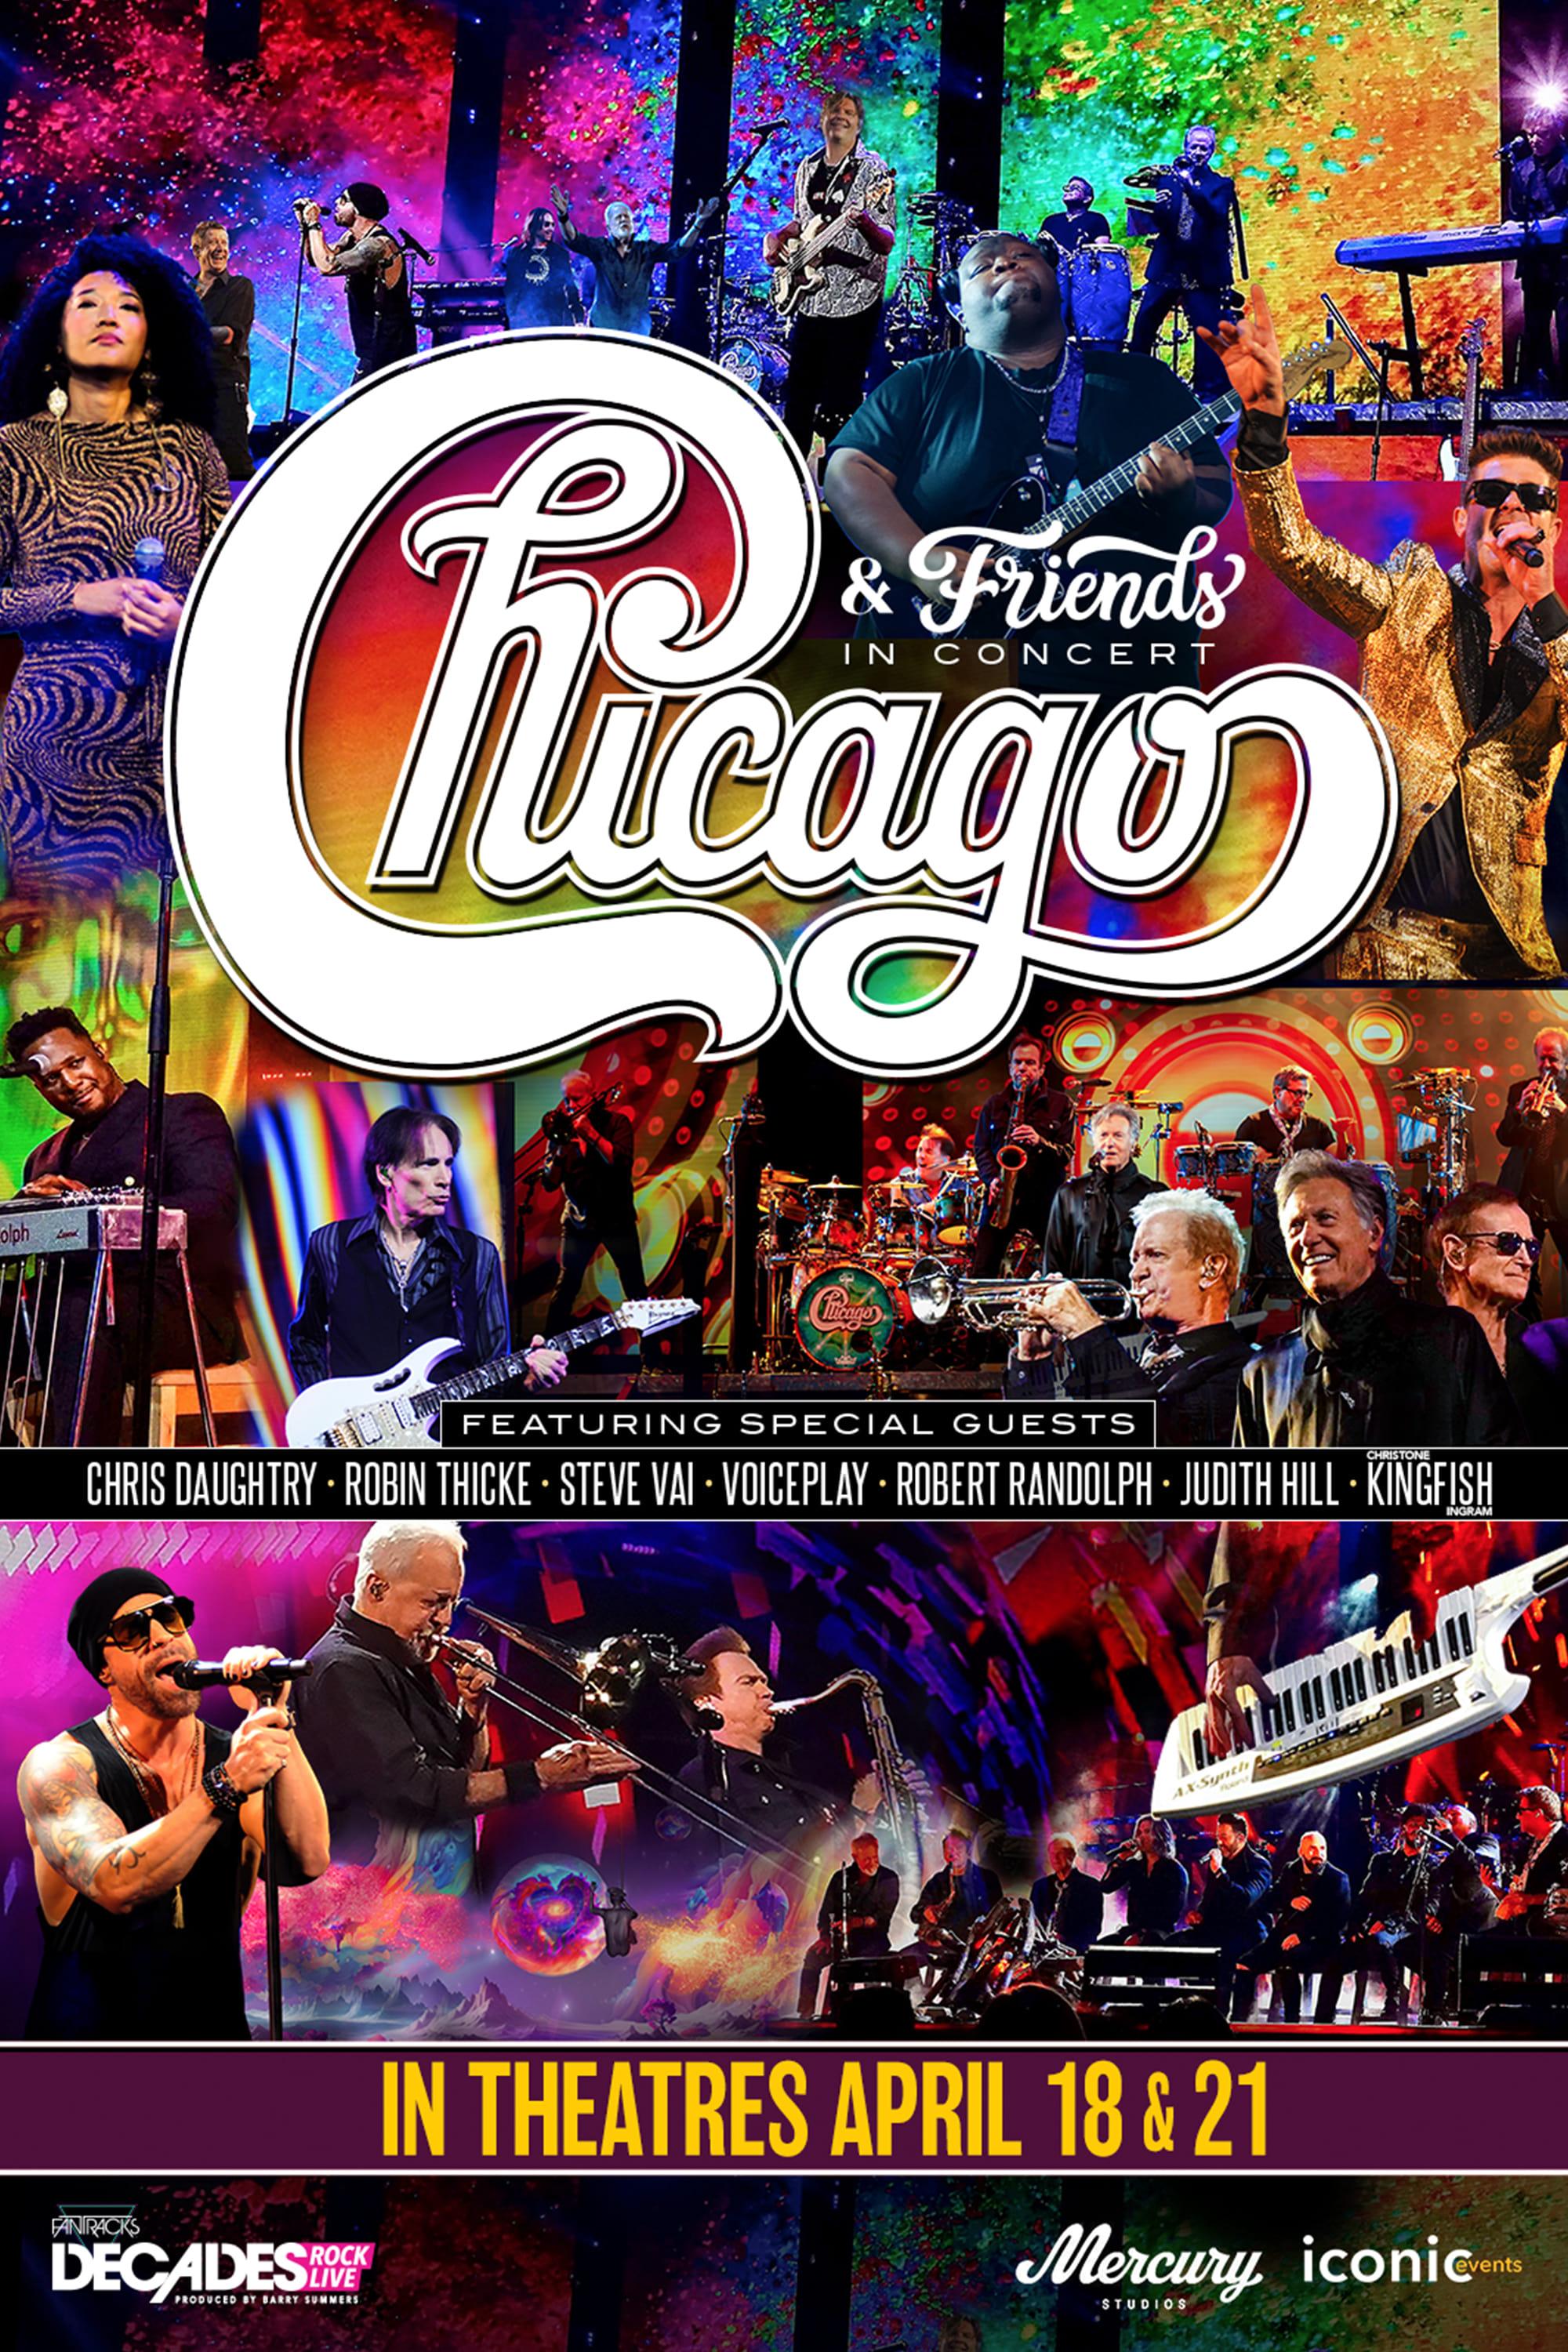 Chicago & Friends in Concert poster